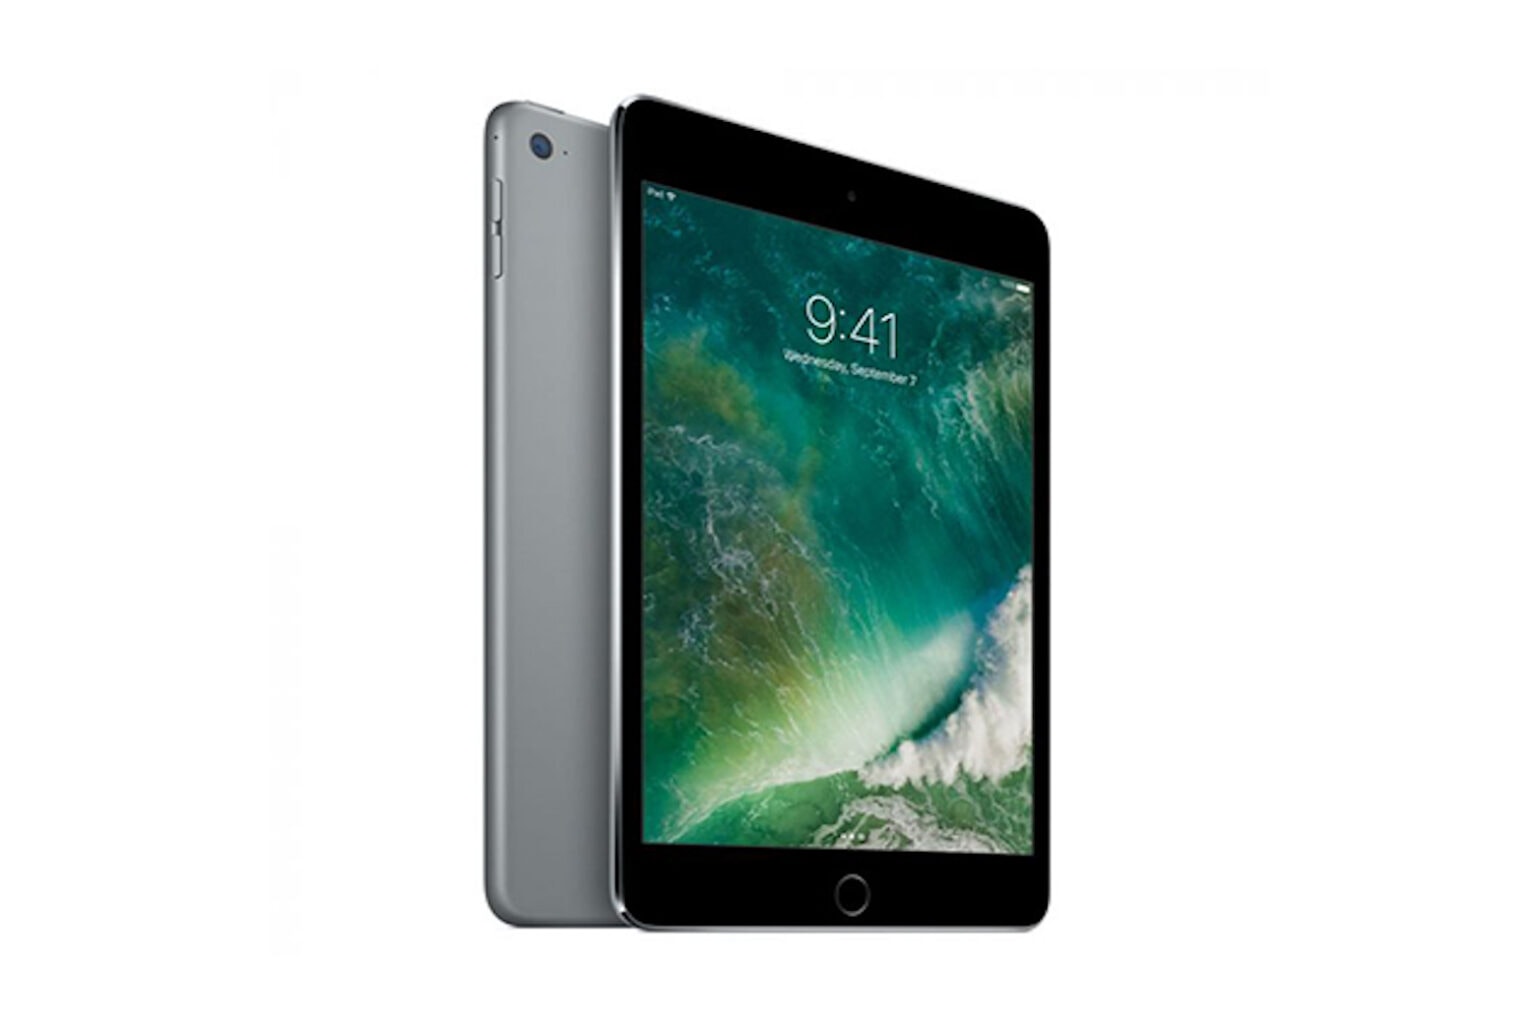 Always have an Apple backup with this refurbished iPad mini 4.